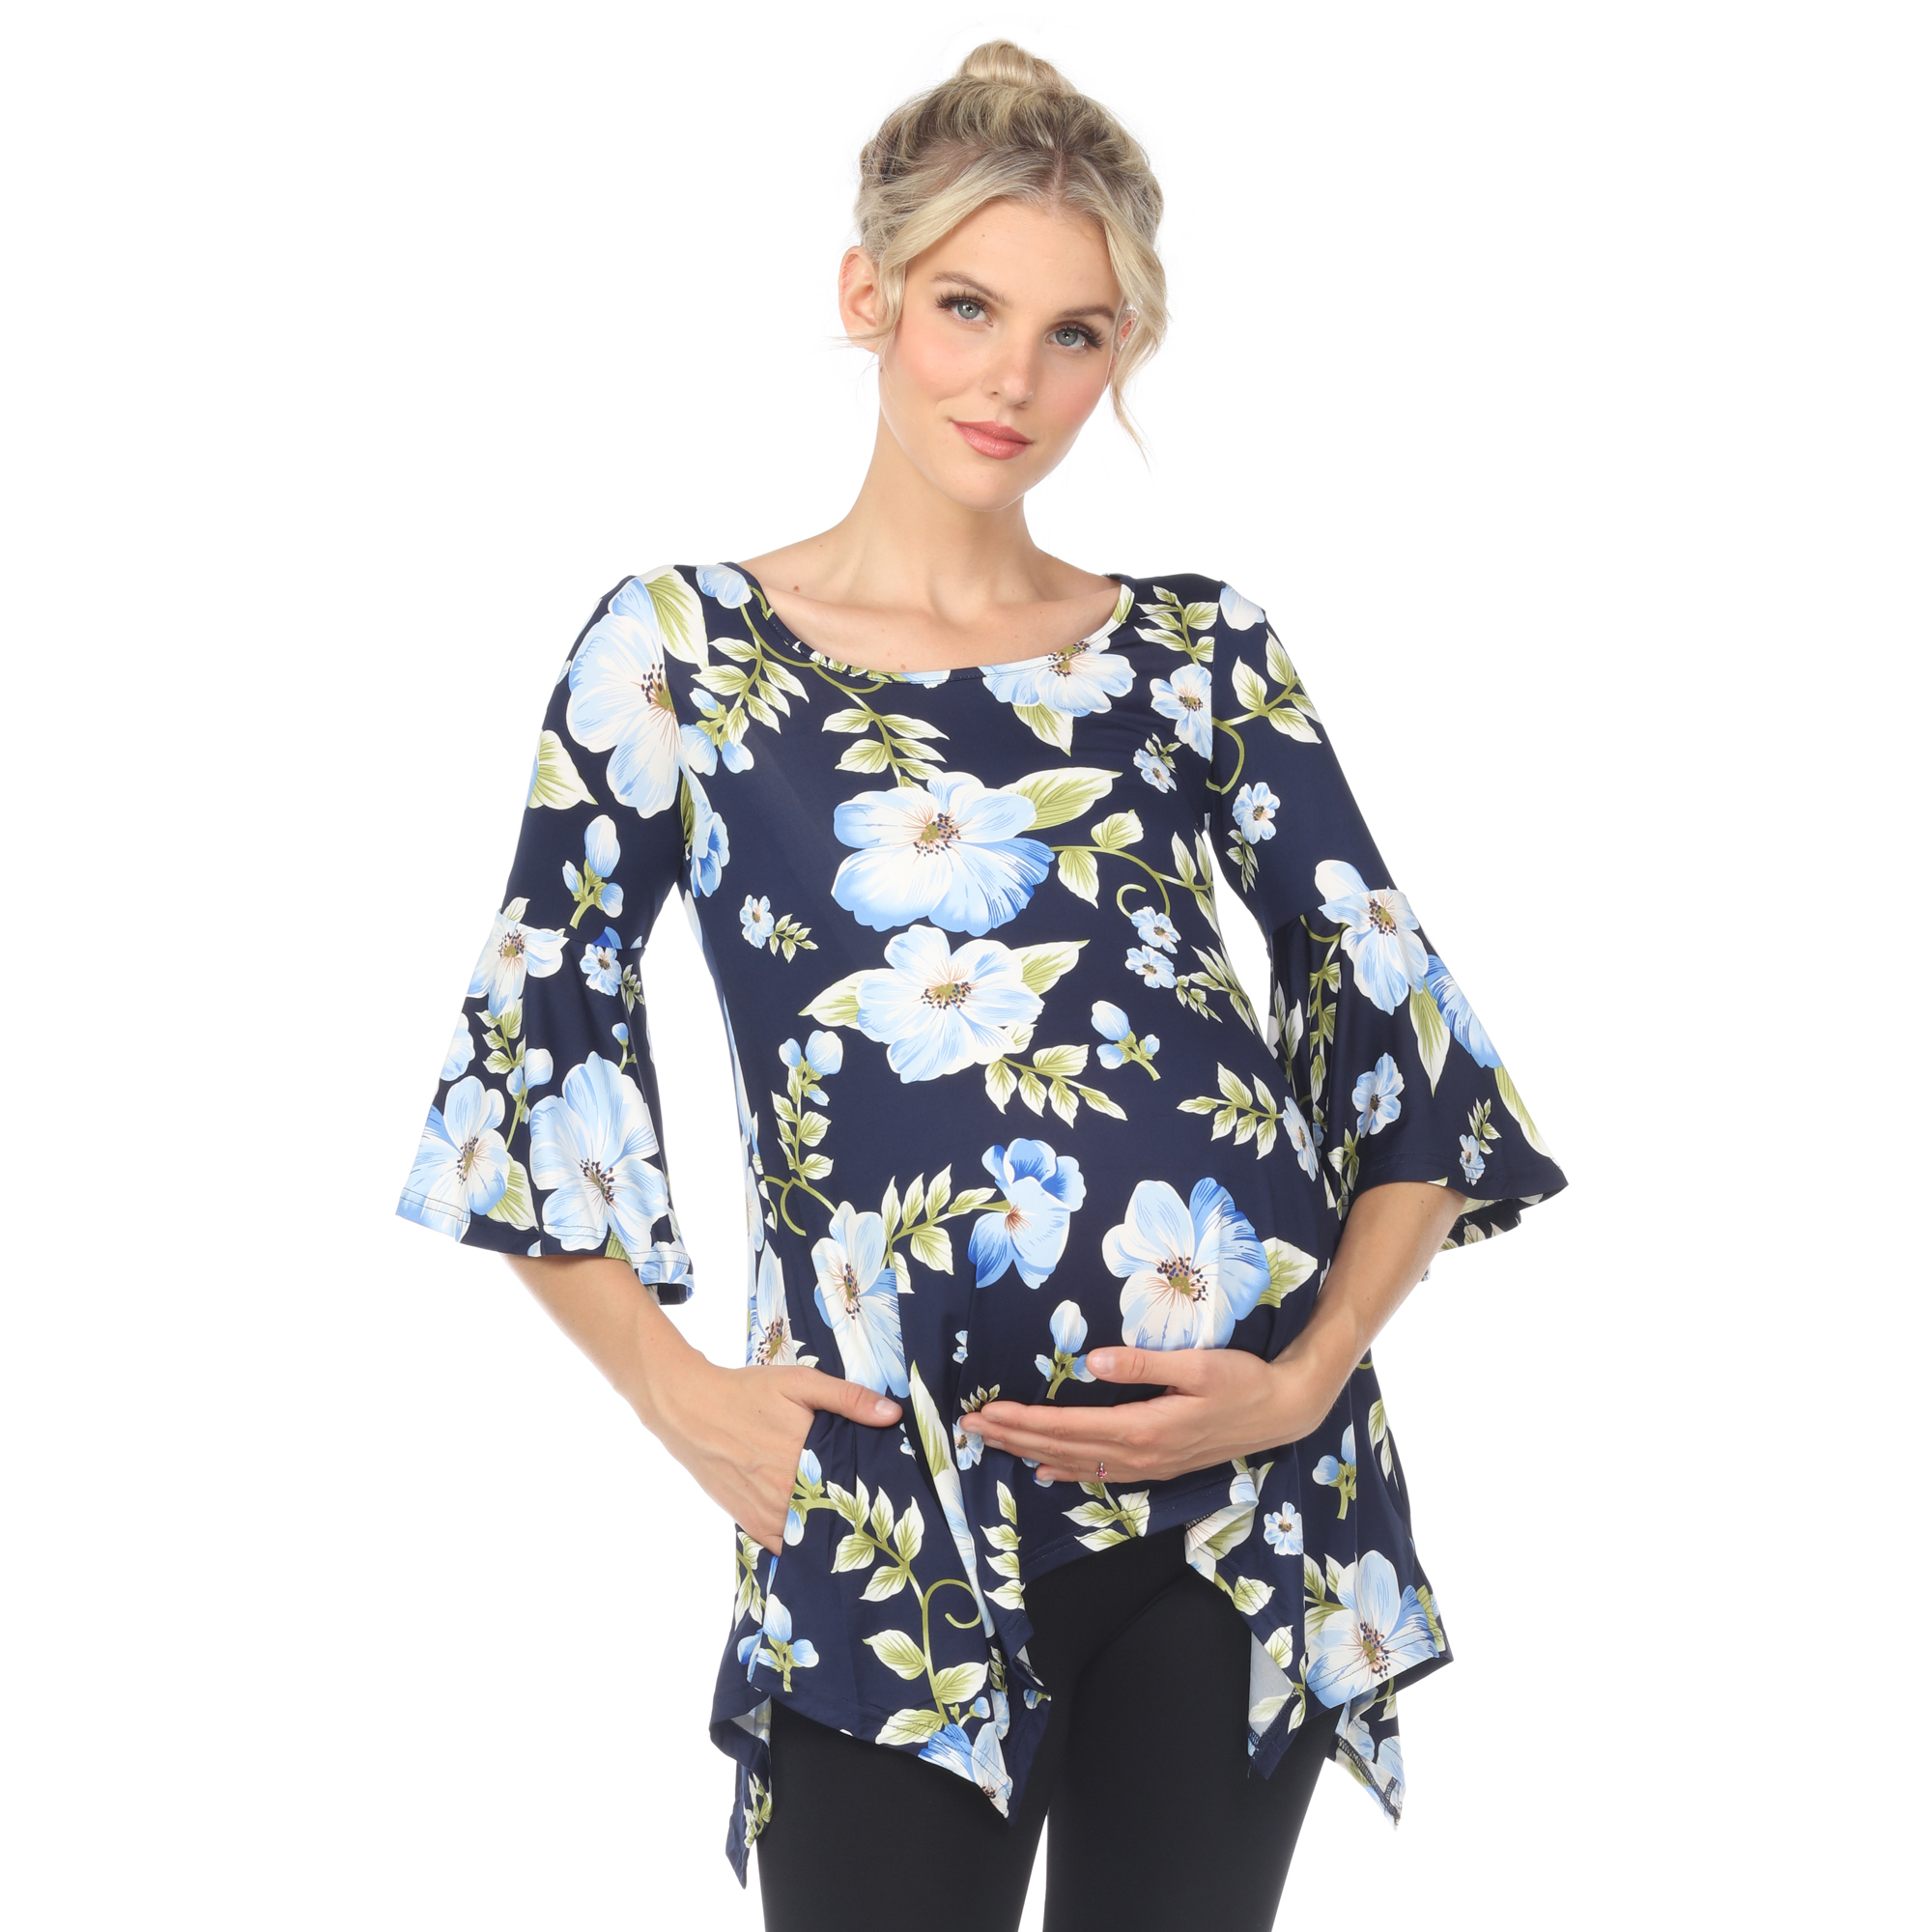 White Mark Women's Maternity Floral Print Quarter Sleeve Tunic Top With Pockets - Blue Flower, Small